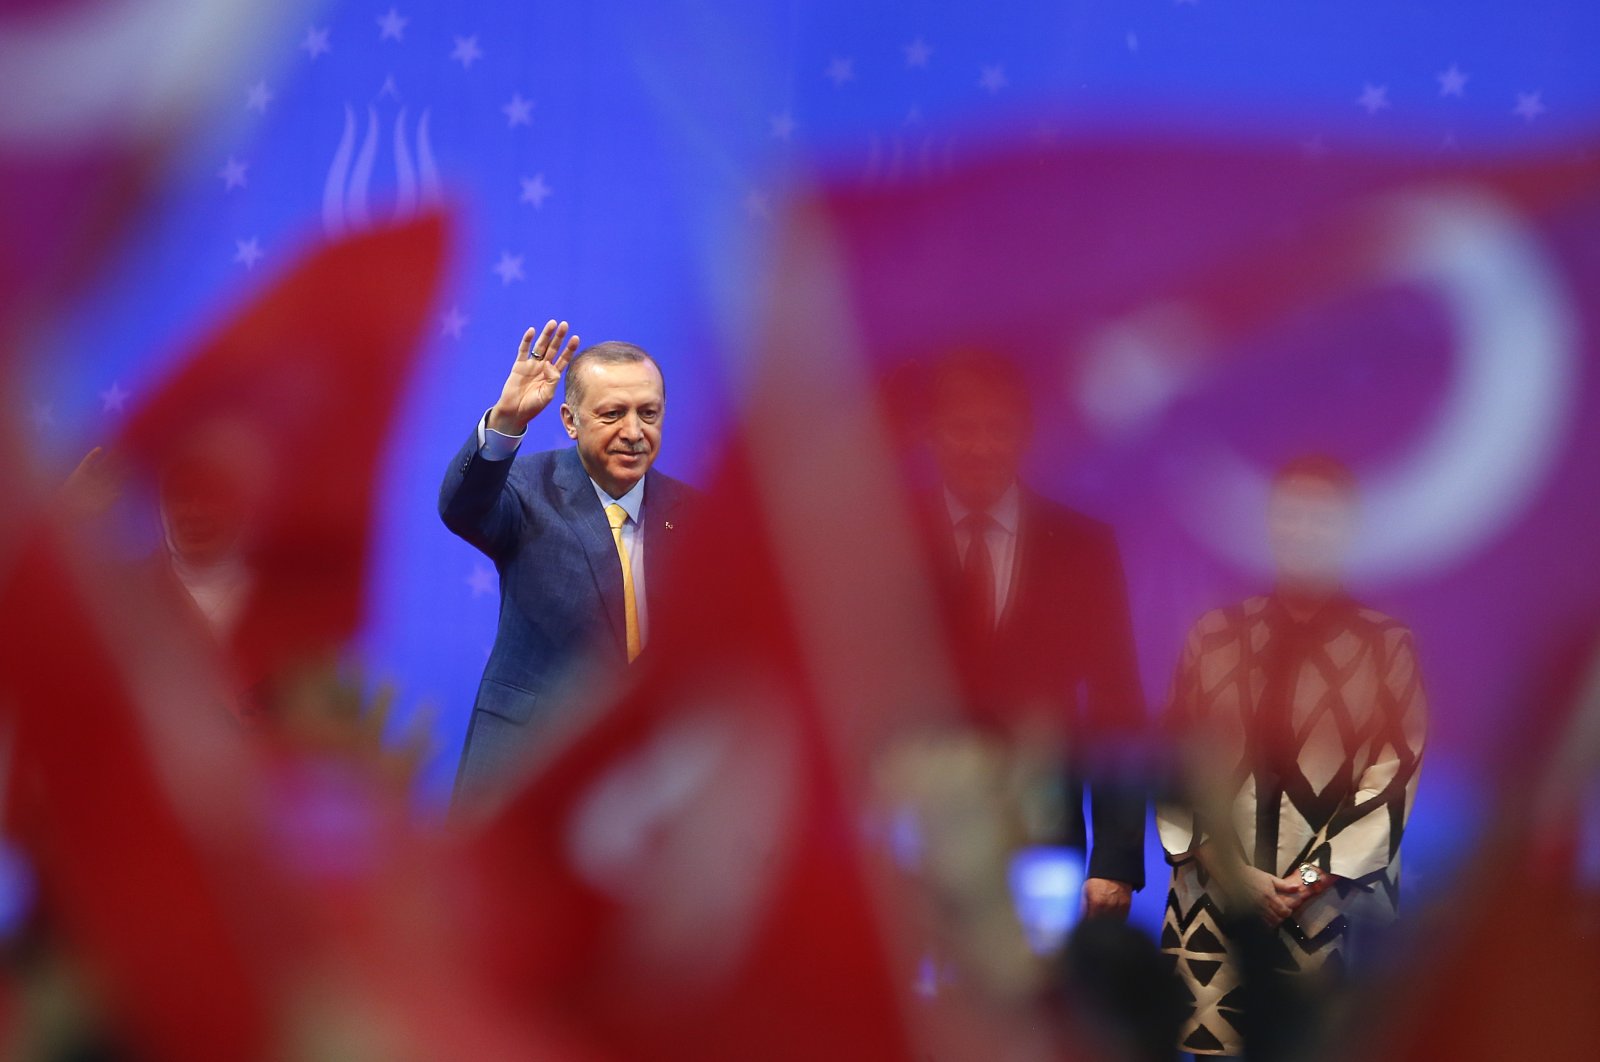 President Recep Tayyip Erdoğan greets supporters during a pre-election rally in Sarajevo, Bosnia-Herzegovina, May 20, 2018. (Reuters Photo)